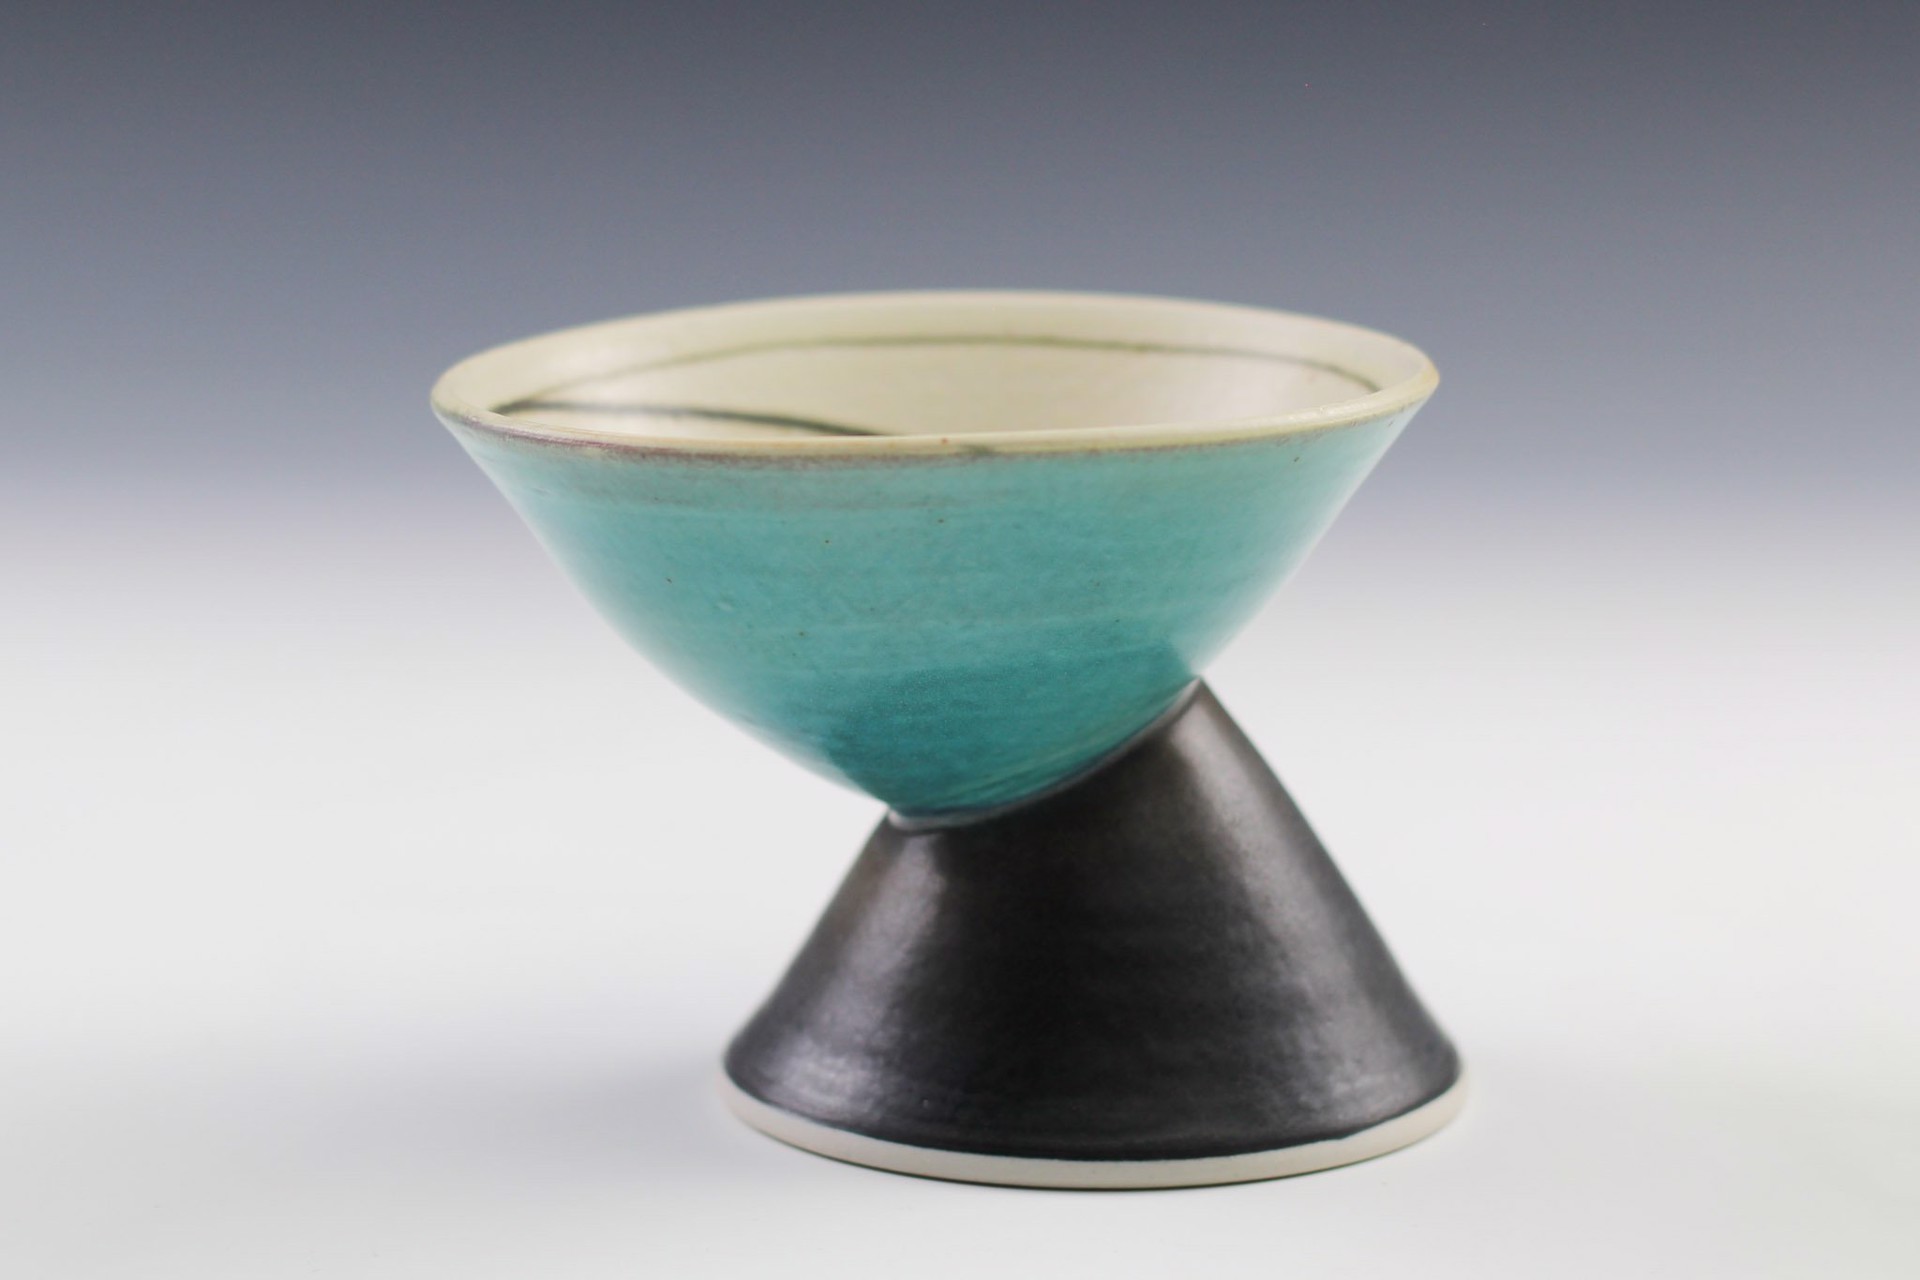 Goblet by Delores Fortuna